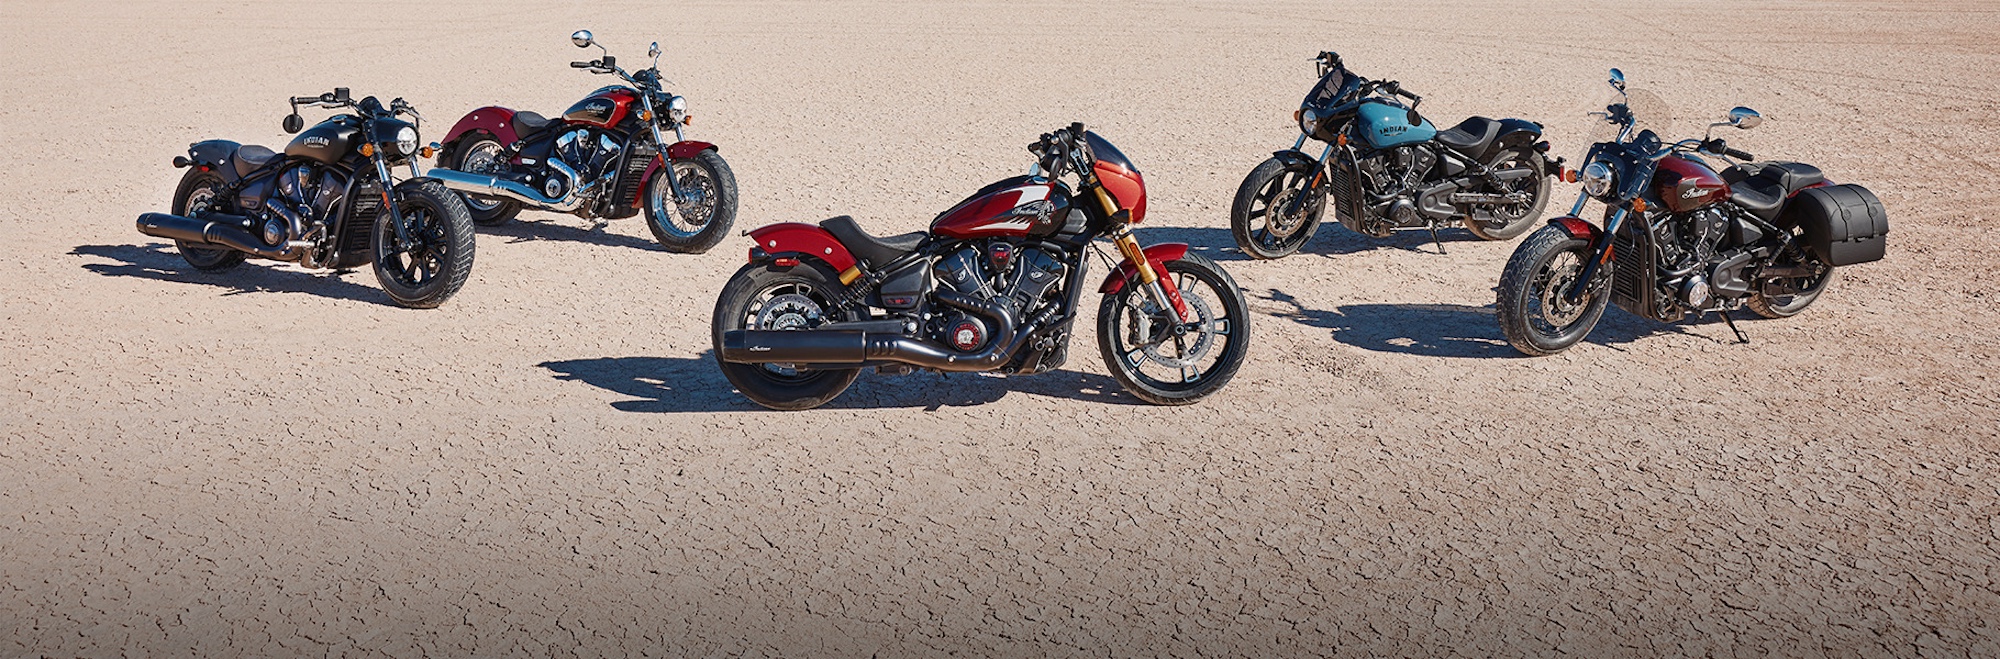 Five Indian motorcycles.